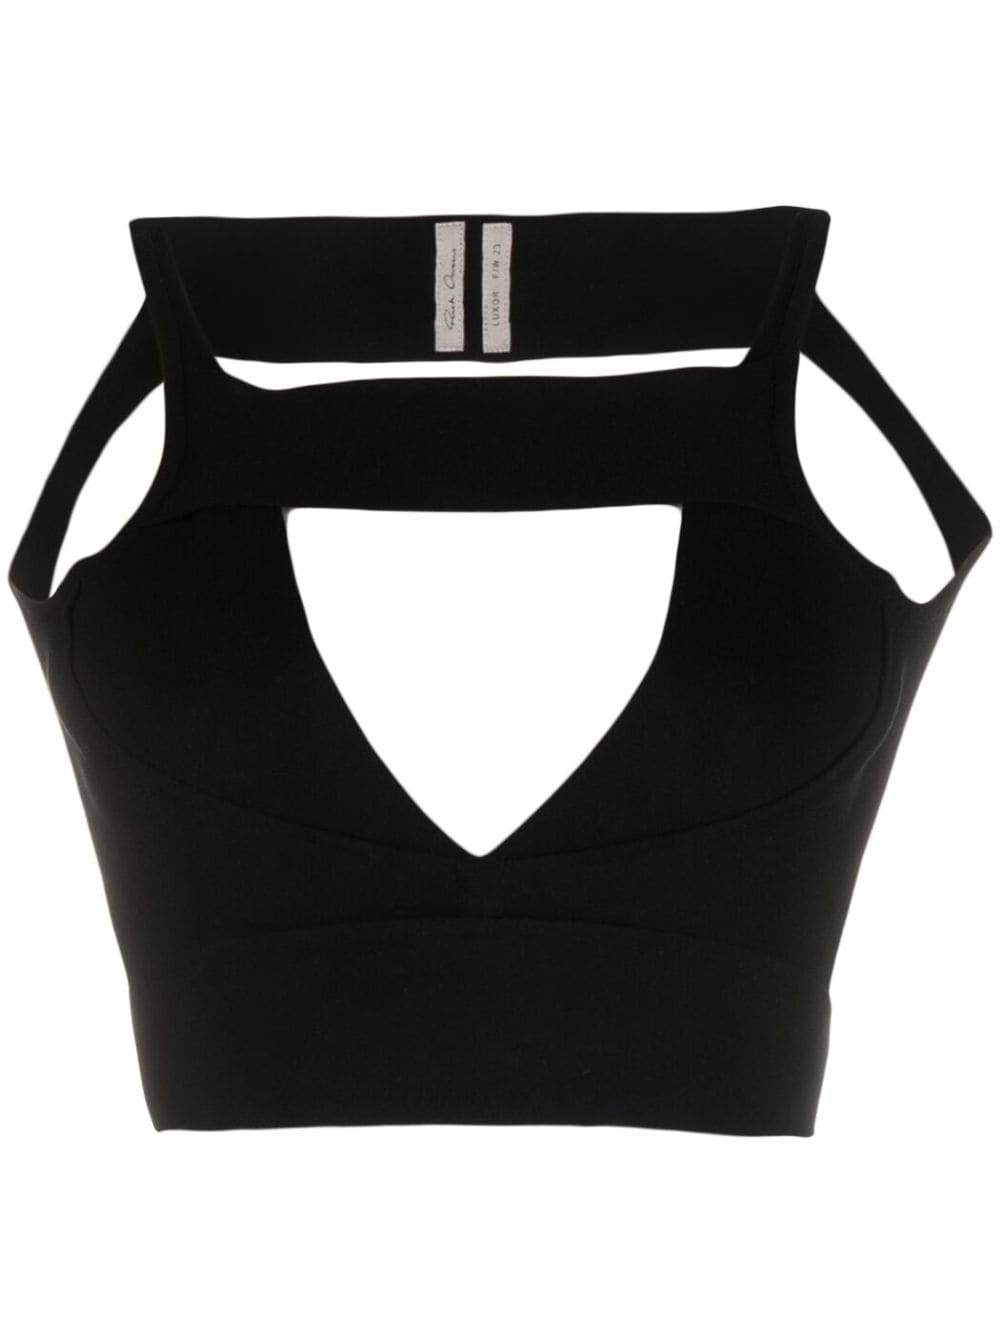 Top con cut-out in nero - donna RICK OWENS | RP02C1678KST09